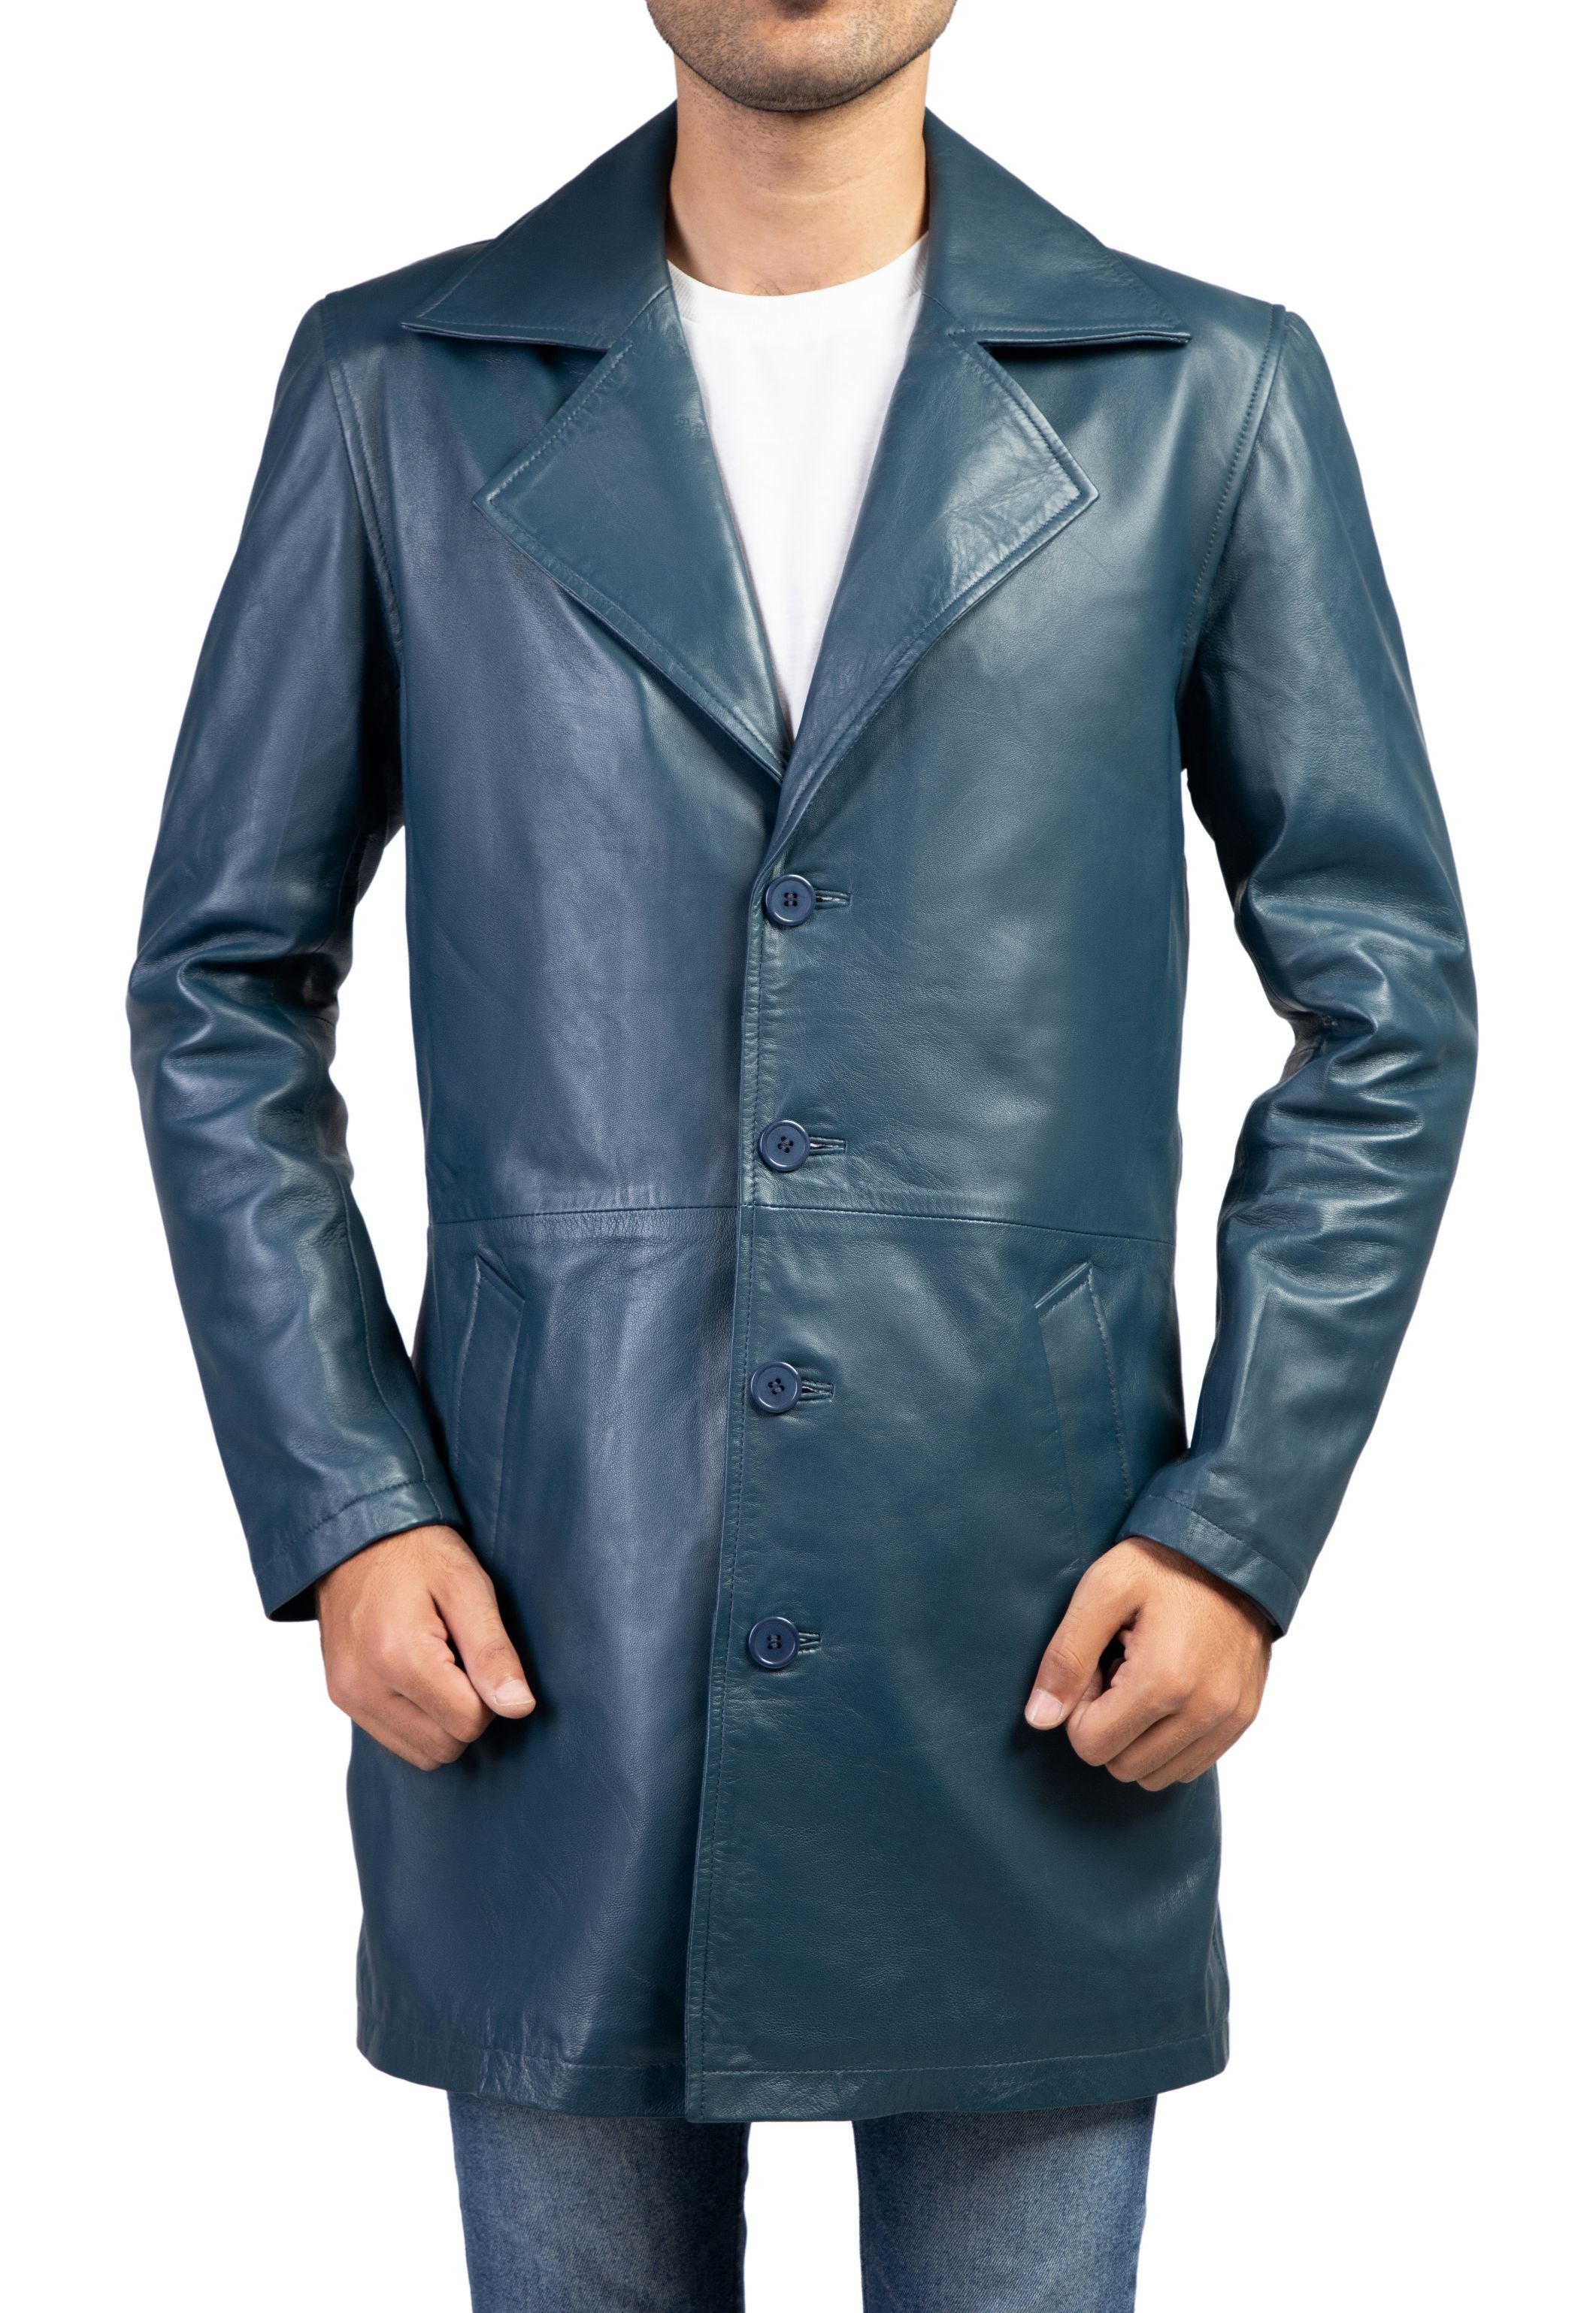 Jild Men's Classic Real Leather Trench Coat